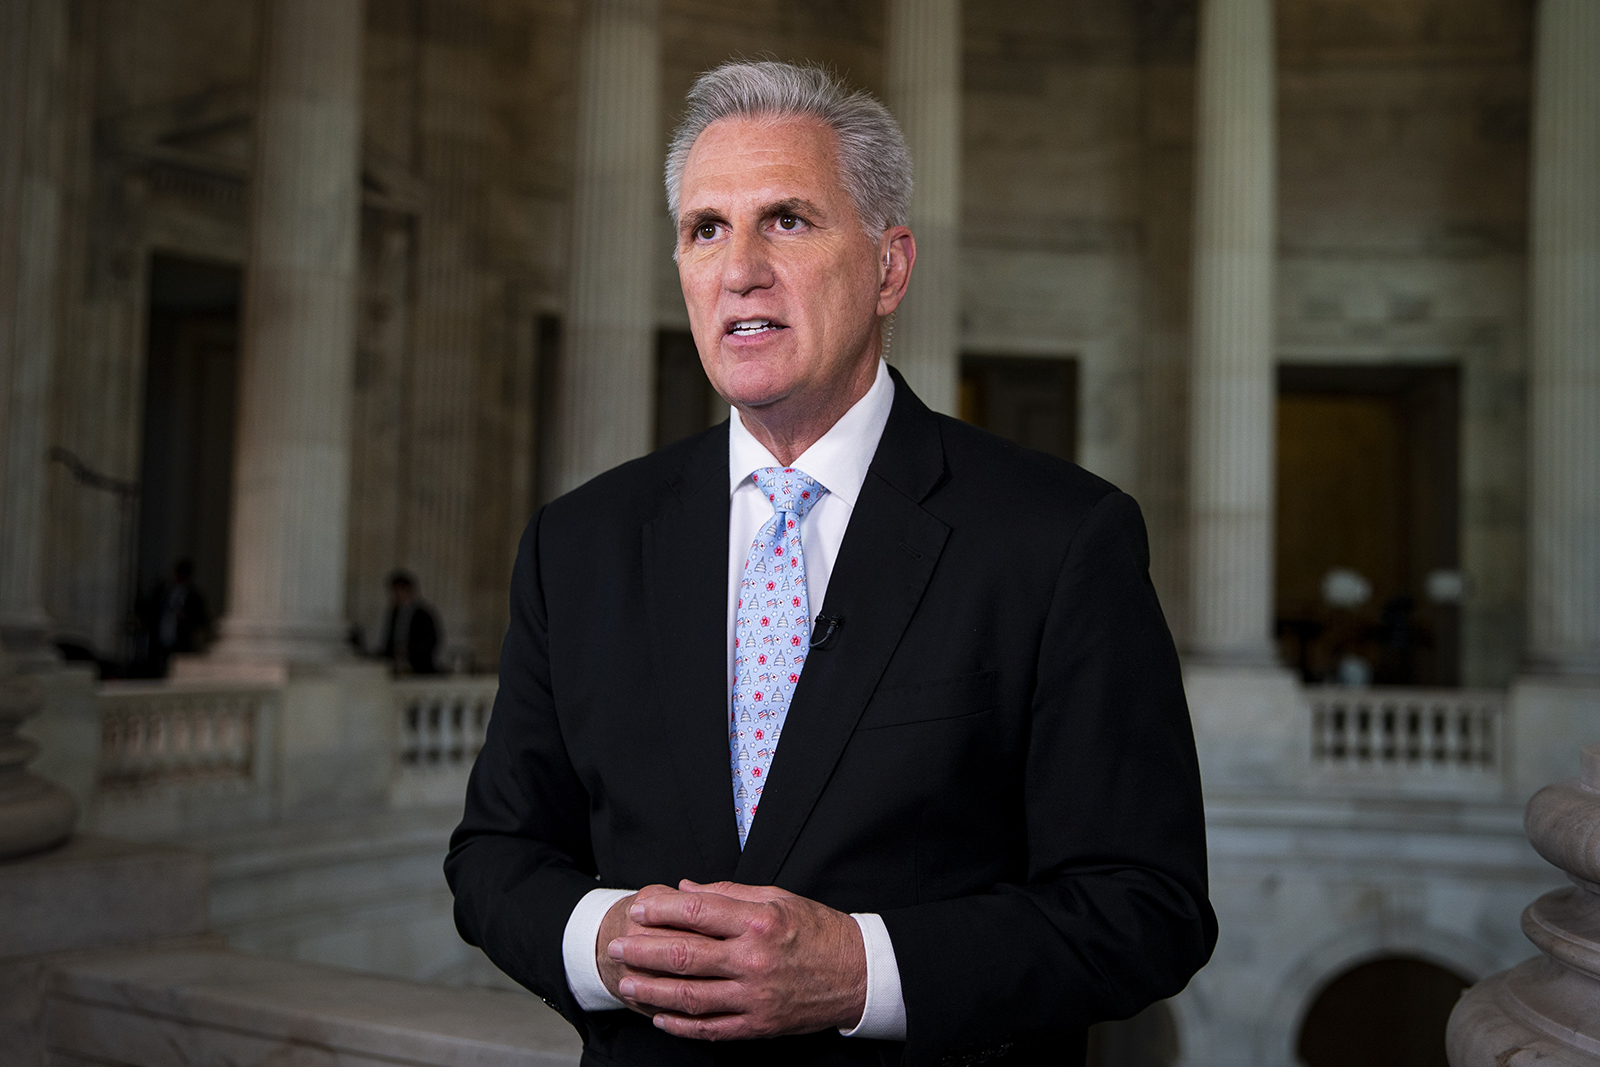 Kevin McCarthy speaks during an interview in Washington, DC, on Thursday, April 27.